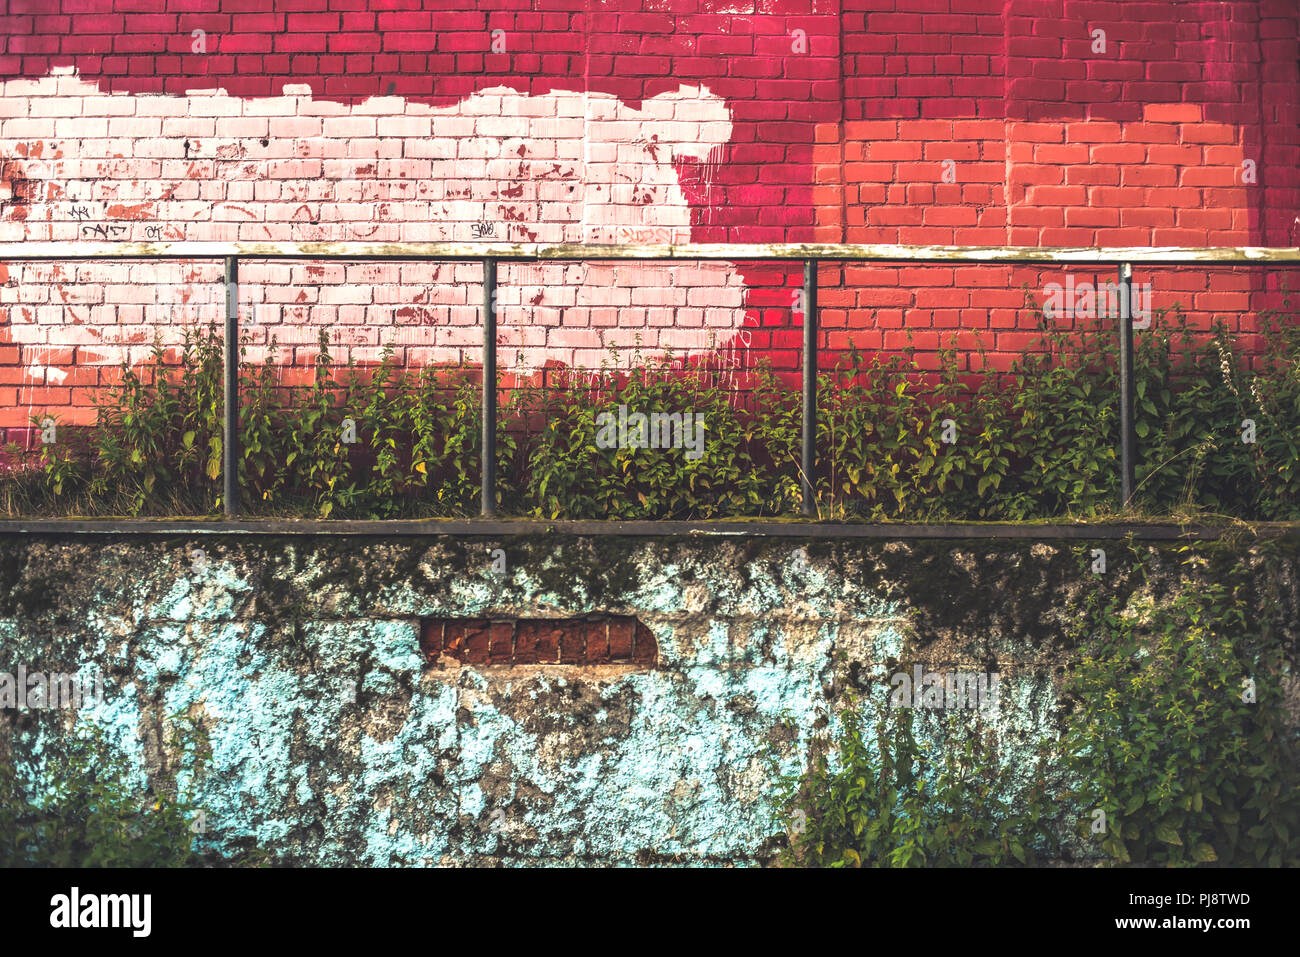 Red and blue brick wall with an iron handrail overgrown with a grass and a nettle Stock Photo